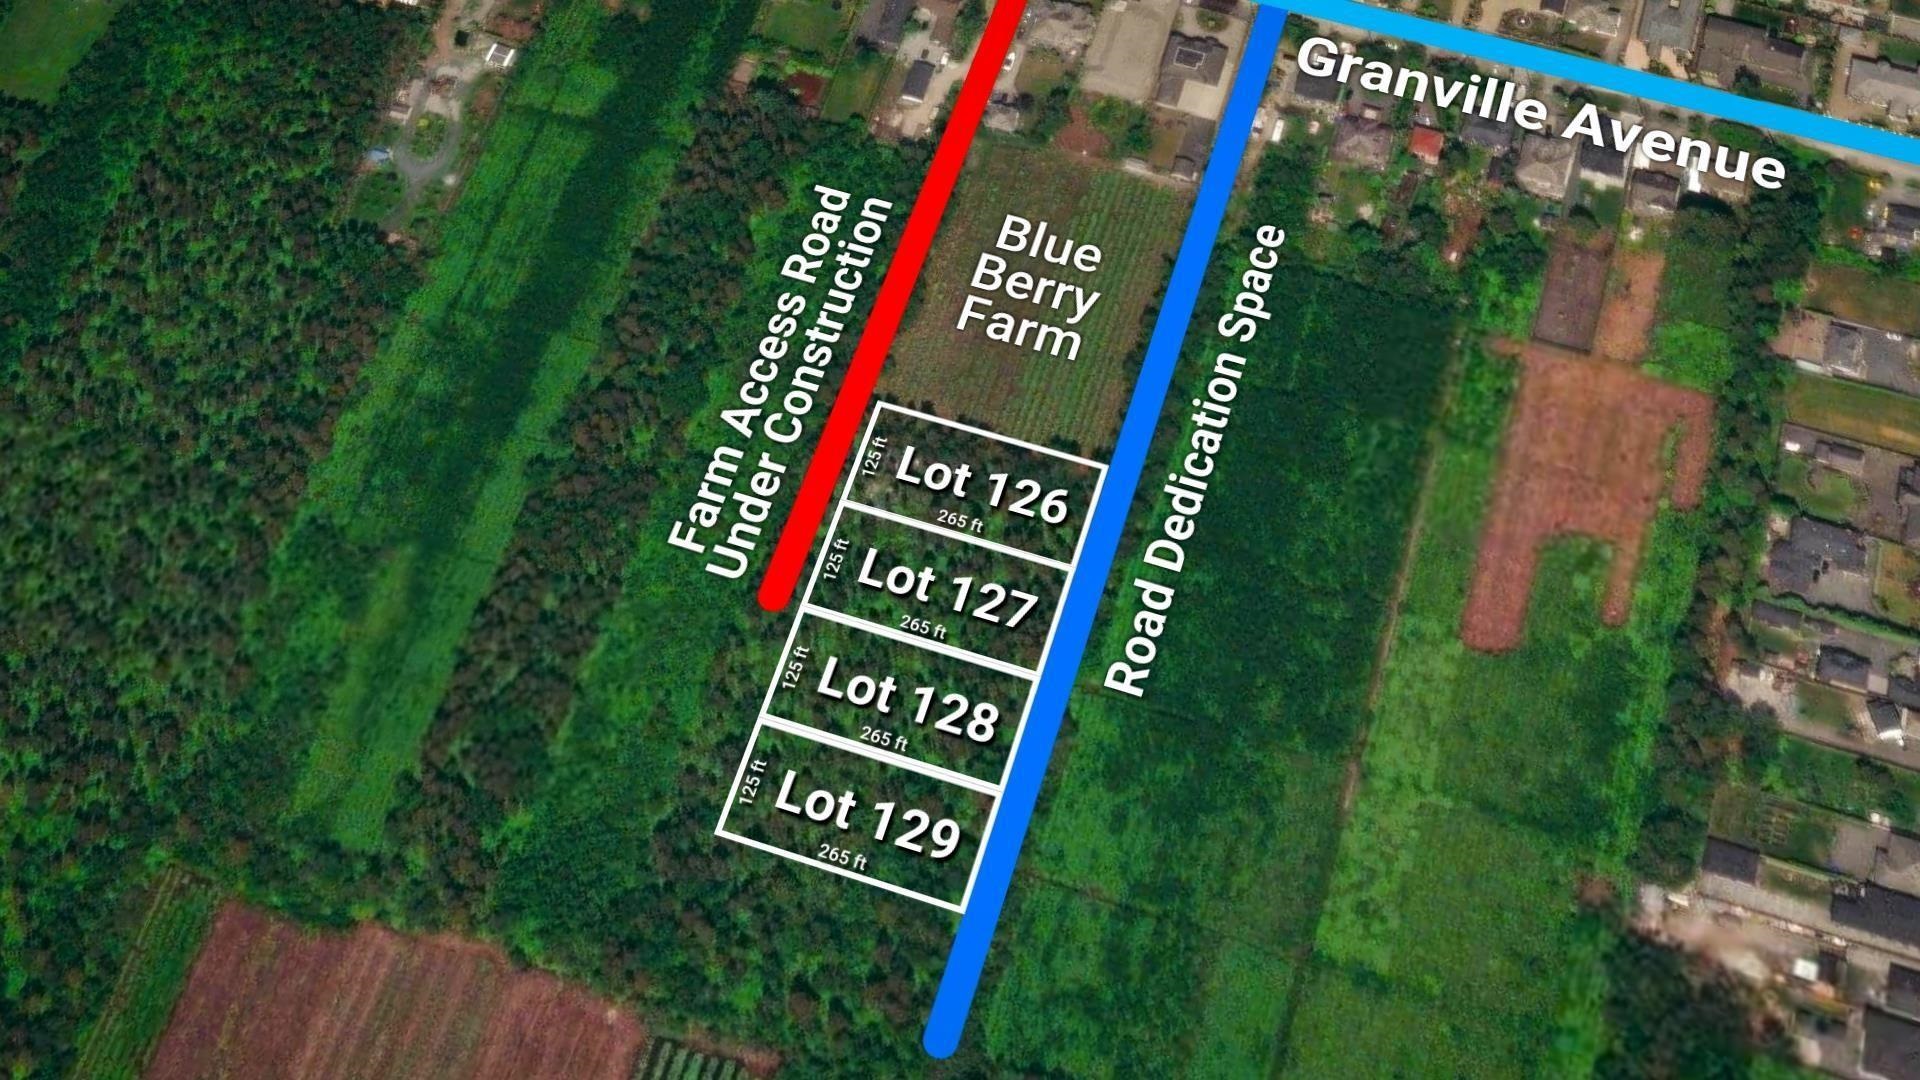 Lot 127 GRANVILLE, Richmond, British Columbia V6Y 1R6, ,Land Only,For Sale,R2881128